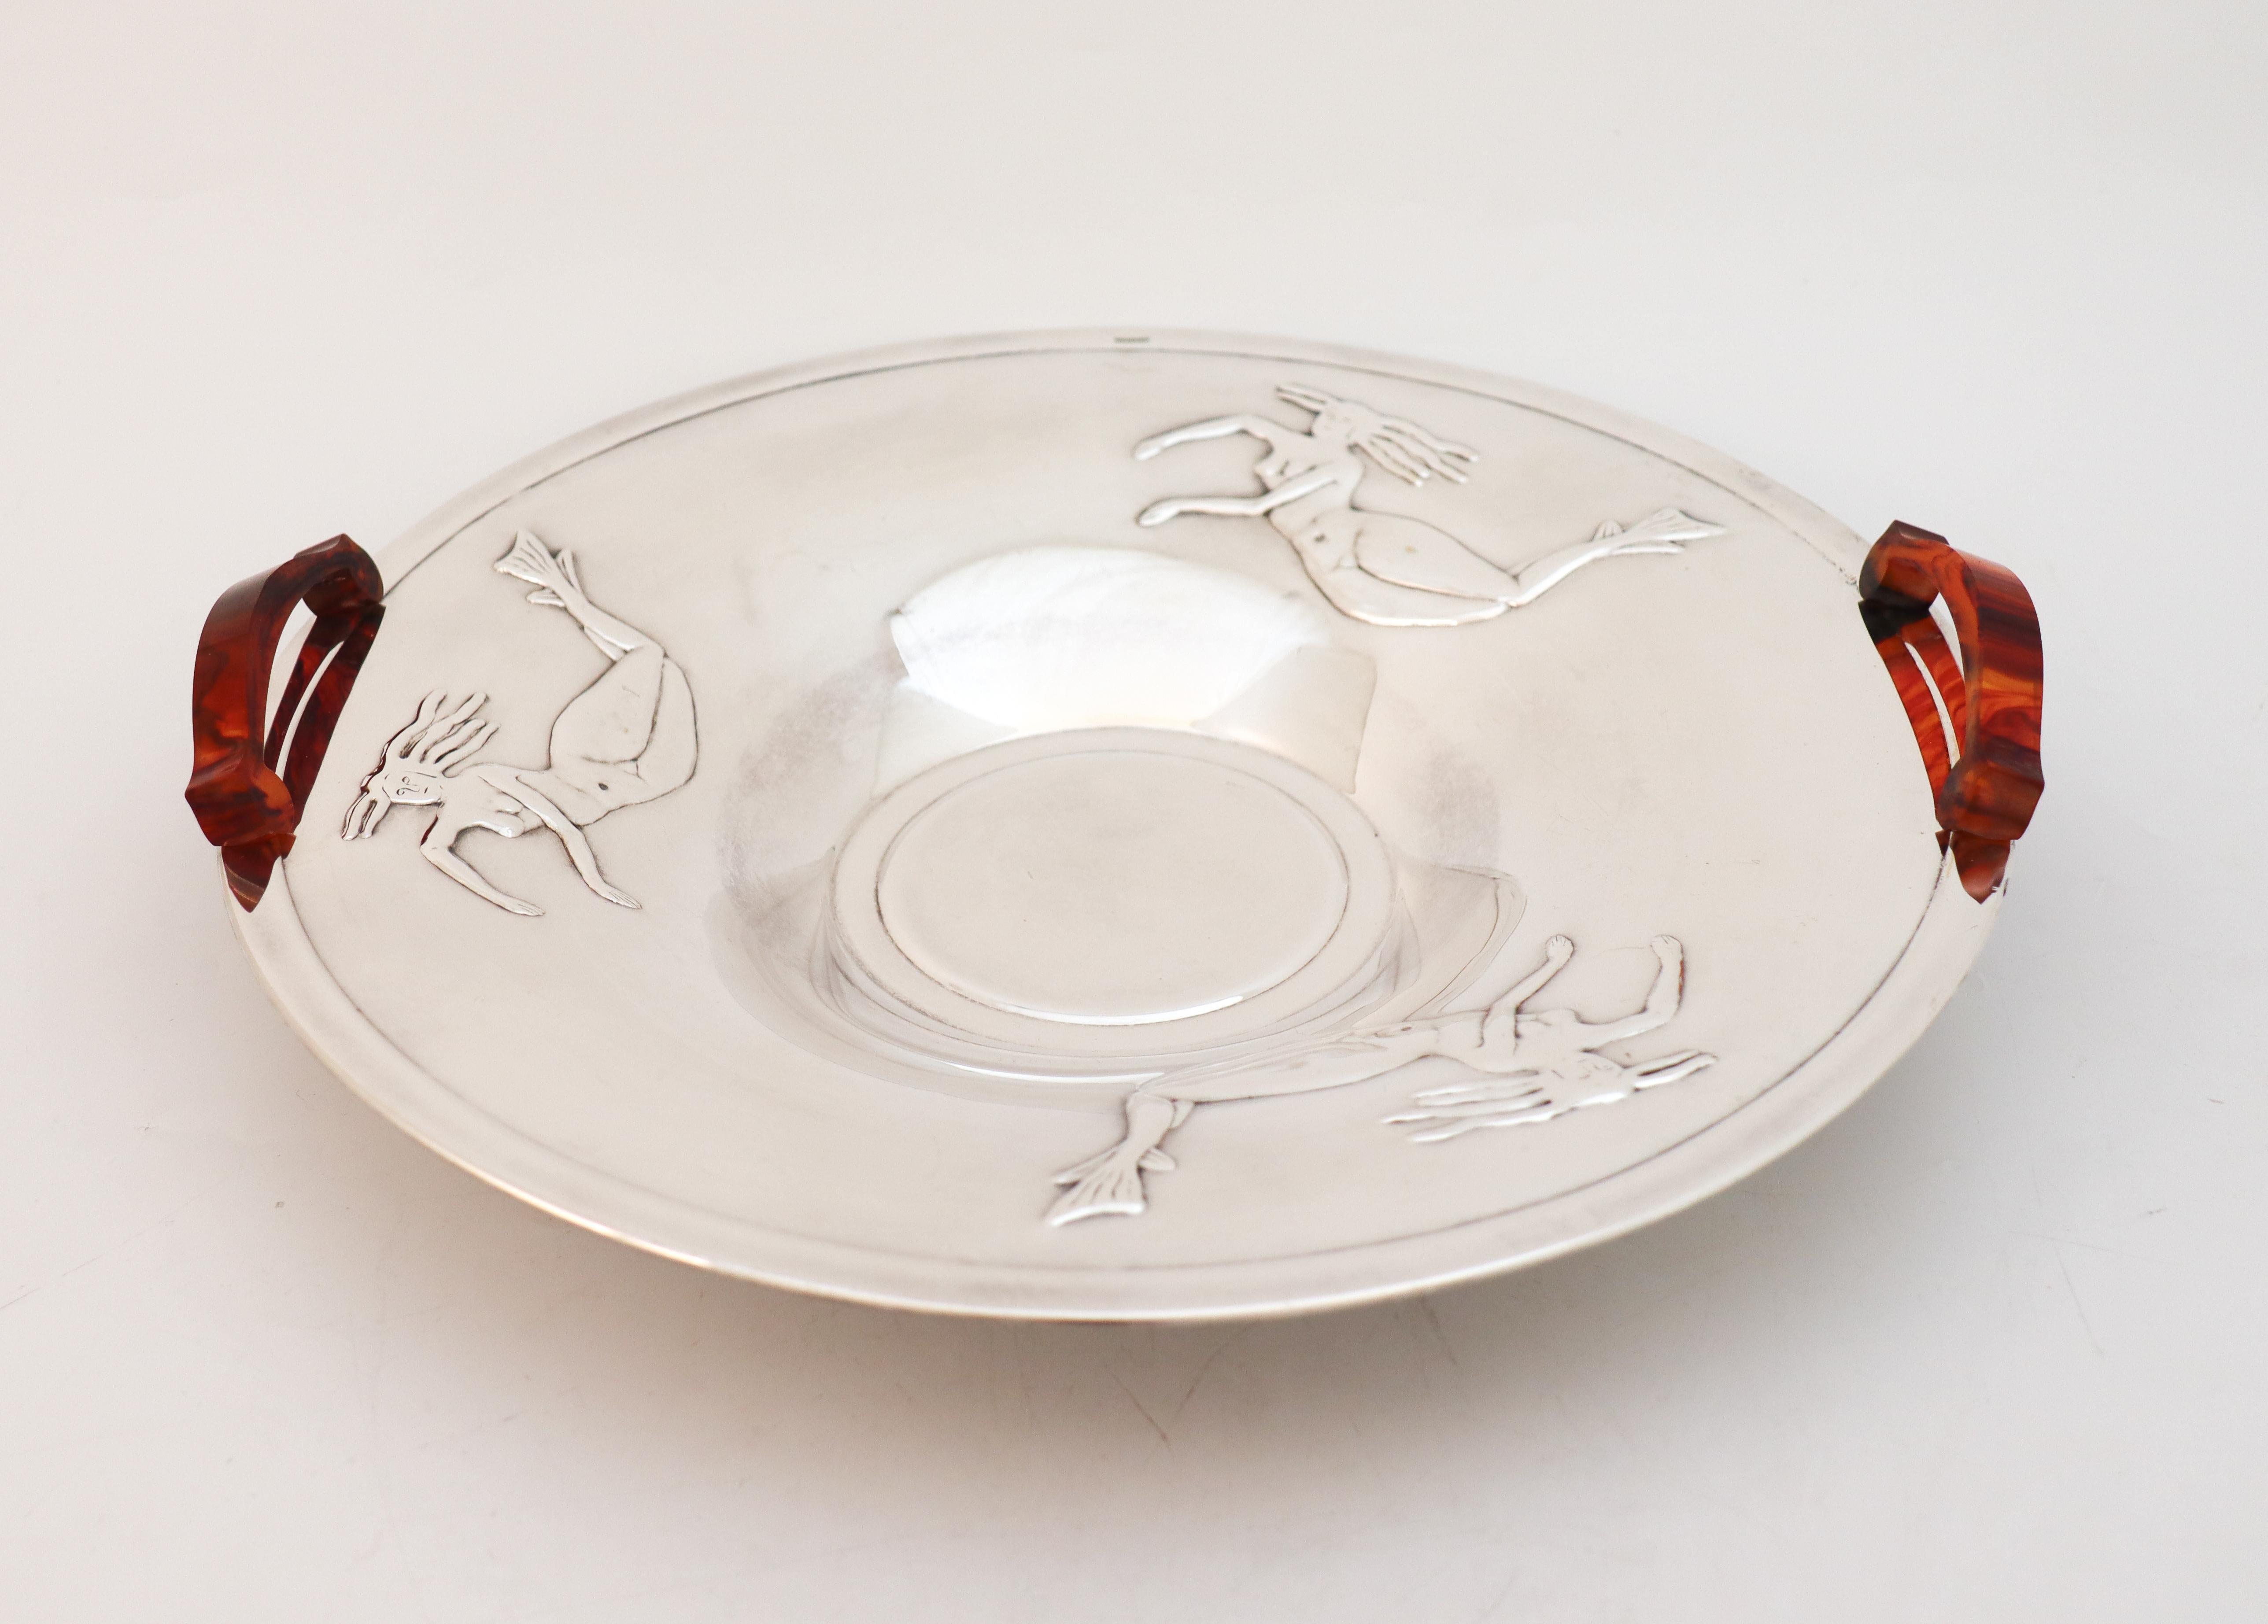 Silver Plated Bowl - Art Deco / Swedish Modern 1930-1940s - Mermaids In Excellent Condition For Sale In Stockholm, SE